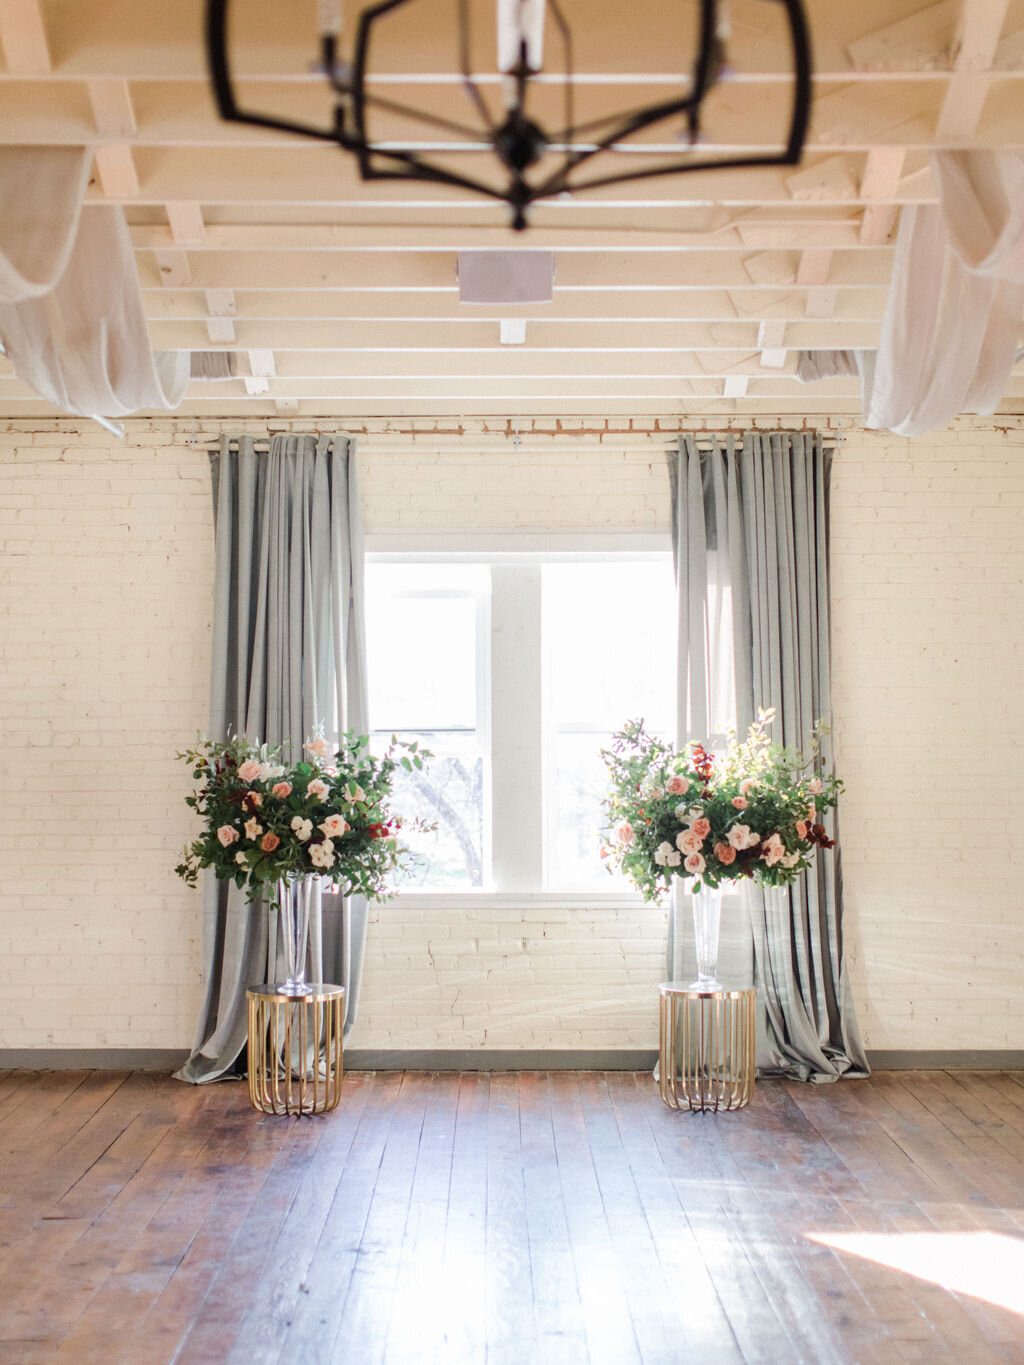 Ceremony at Brik Venue in Fort Worth Texas with two large floral arrangements